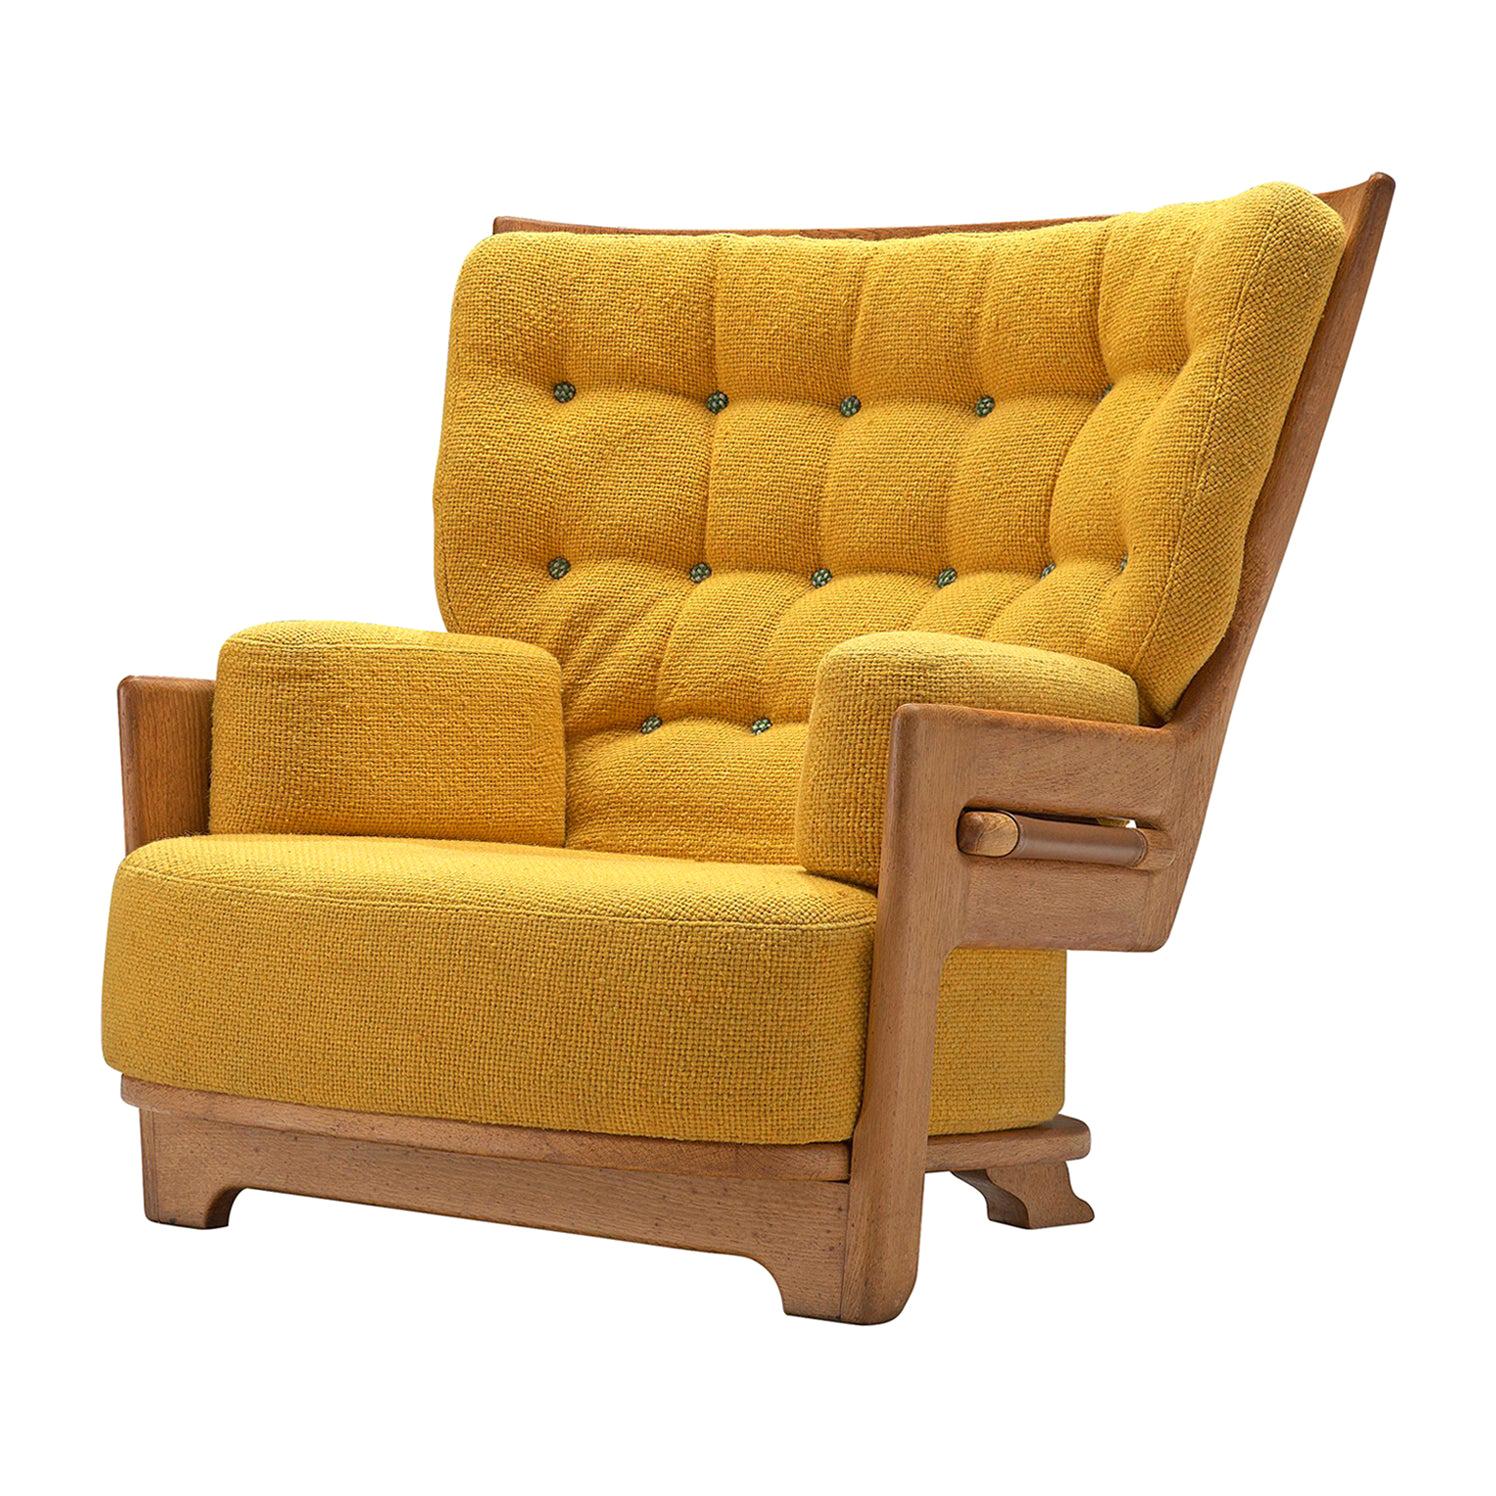 Guillerme & Chambron Large High Back Chair in Sunflower Yellow Upholstery